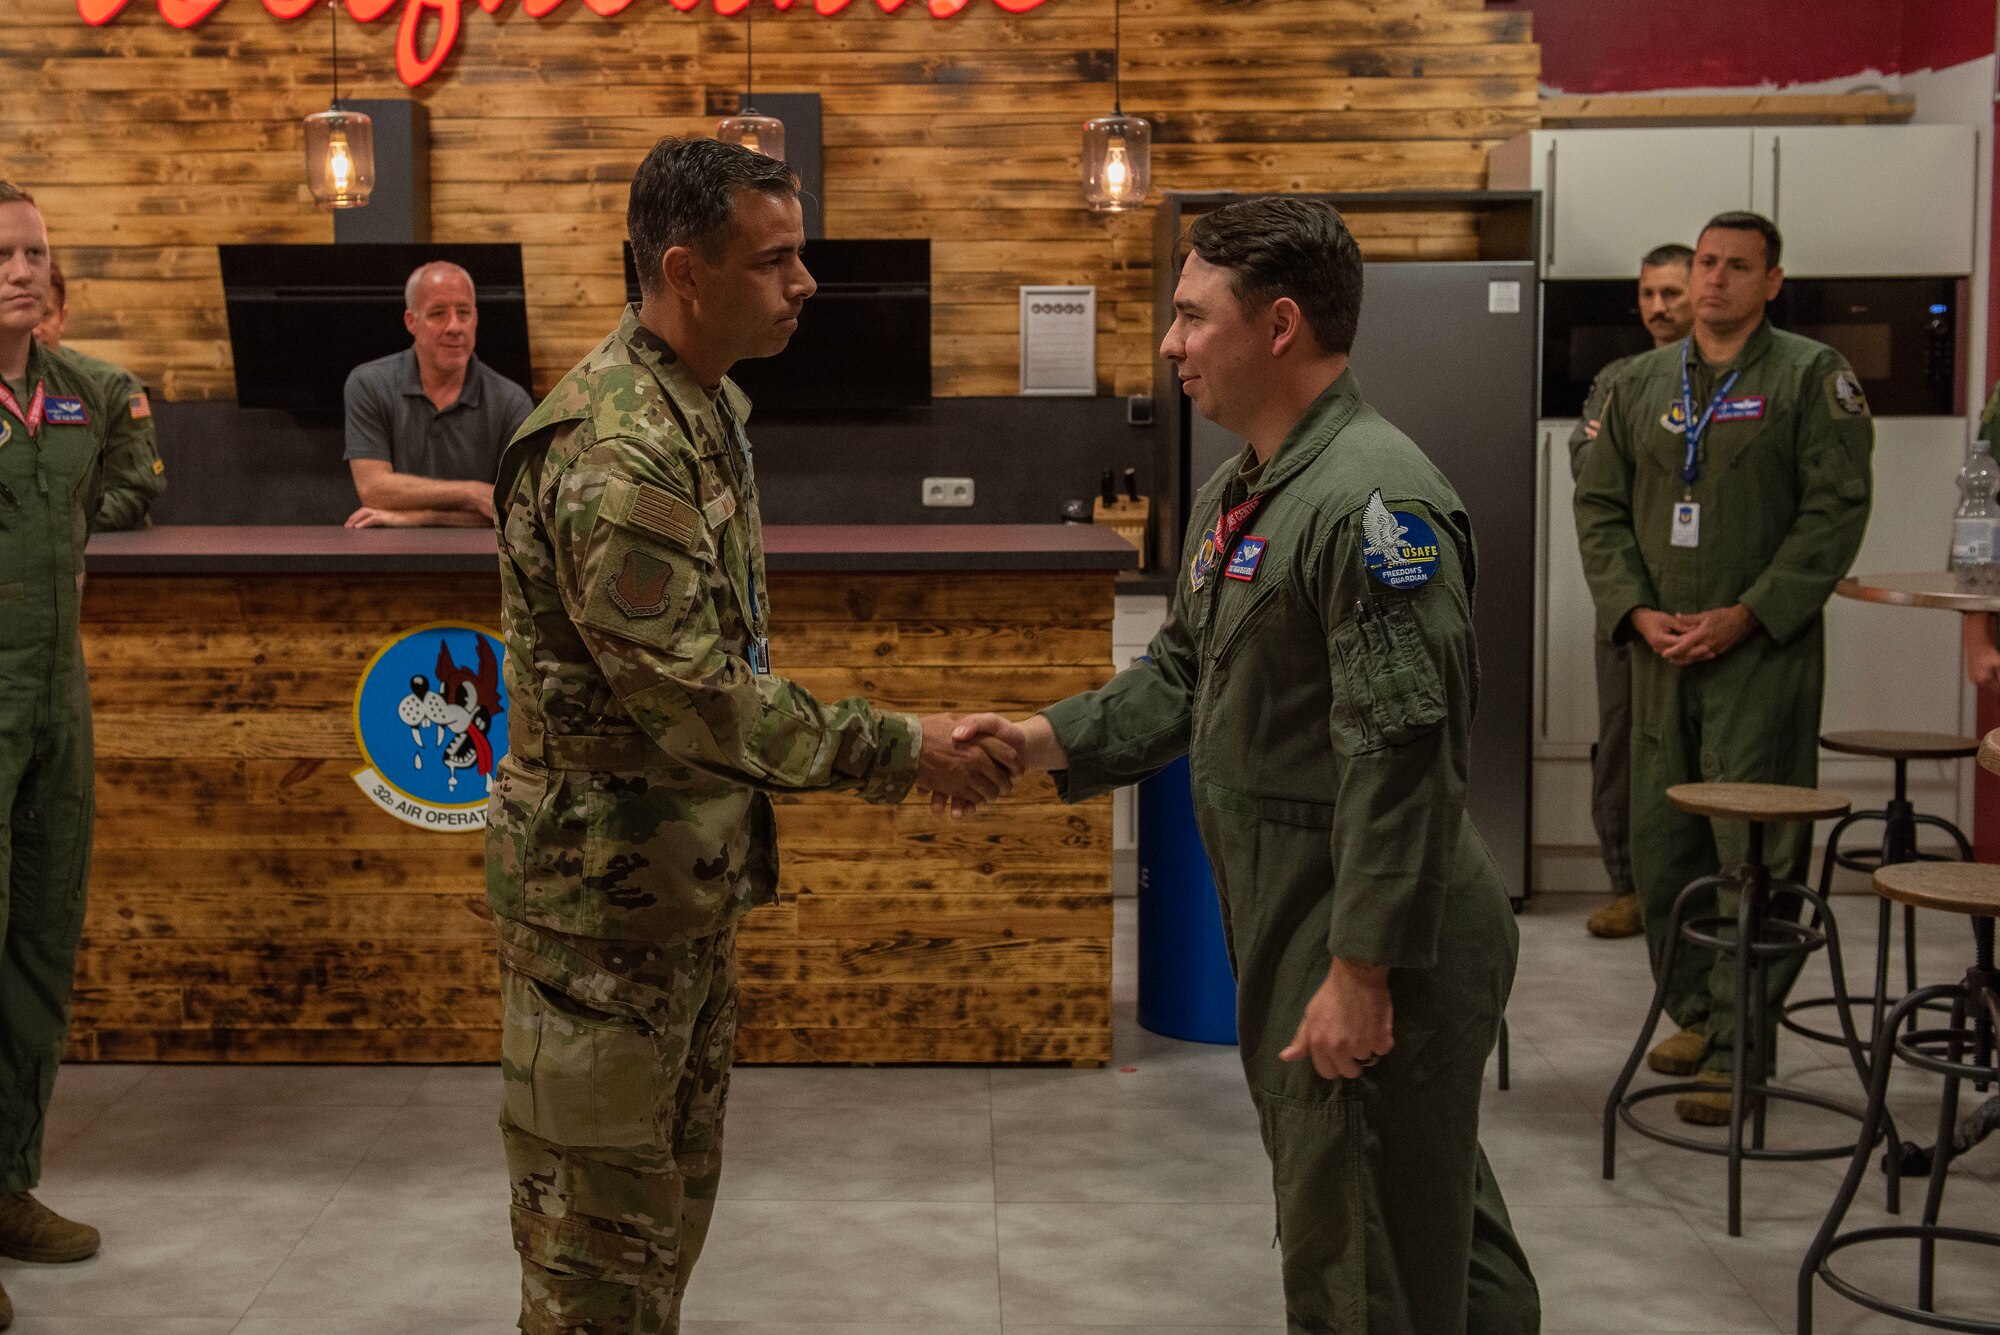 U.S. Air Force Tech. Sgt. Kagan Weatherly, right, 603rd Air Operations Center airlift plans noncommissioned officer in charge, accepts a coin from Col. Jamil Musa, left, 86th Airlift Wing vice commander, at Ramstein Air Base, Germany, July 20, 2023. Weatherly was awarded Airlifter of the Week for his efforts in his work center such as planning C-130 missions supporting the U.S. European and African Commands, overseeing multiple NATO readiness exercises including Finland’s first exercise as a NATO member, and ensuring more than 400 Airmen in his squadron are fit to fight as a primary unit fitness program manager. (U.S. Air Force photo by Senior Airman Madelyn Keech)